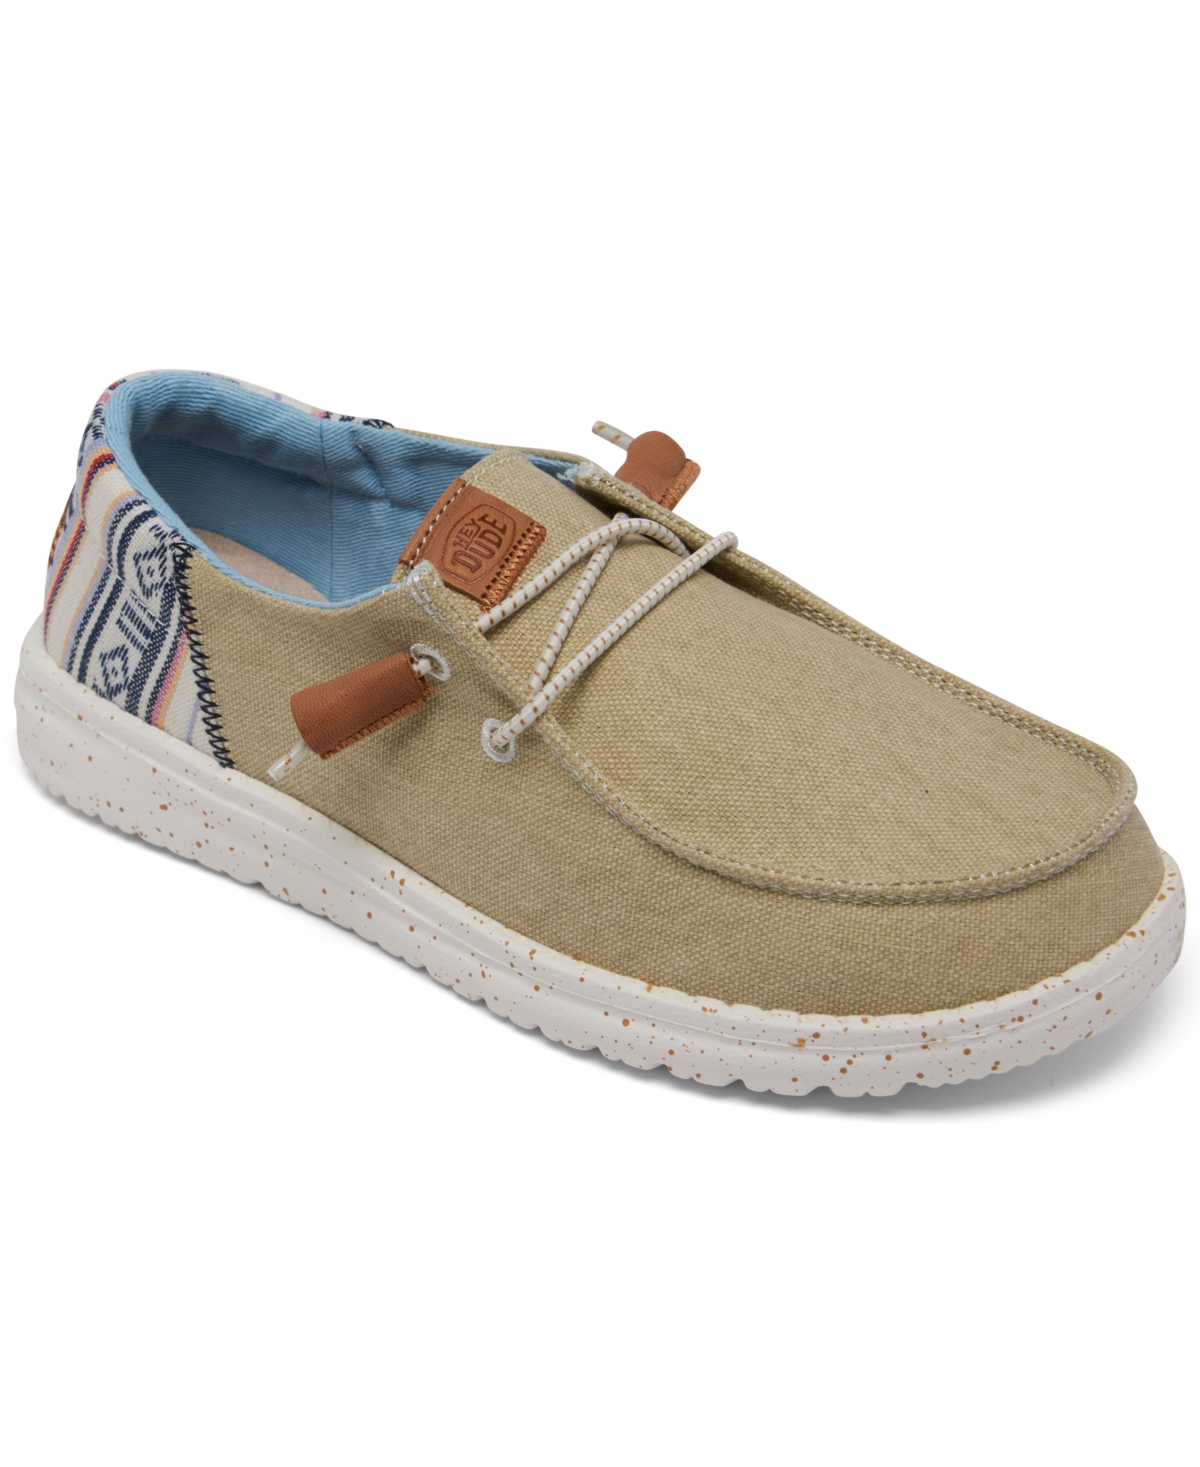 Women's Wendy Funk Casual Moccasin Sneakers from Finish Line - Natural, Multi